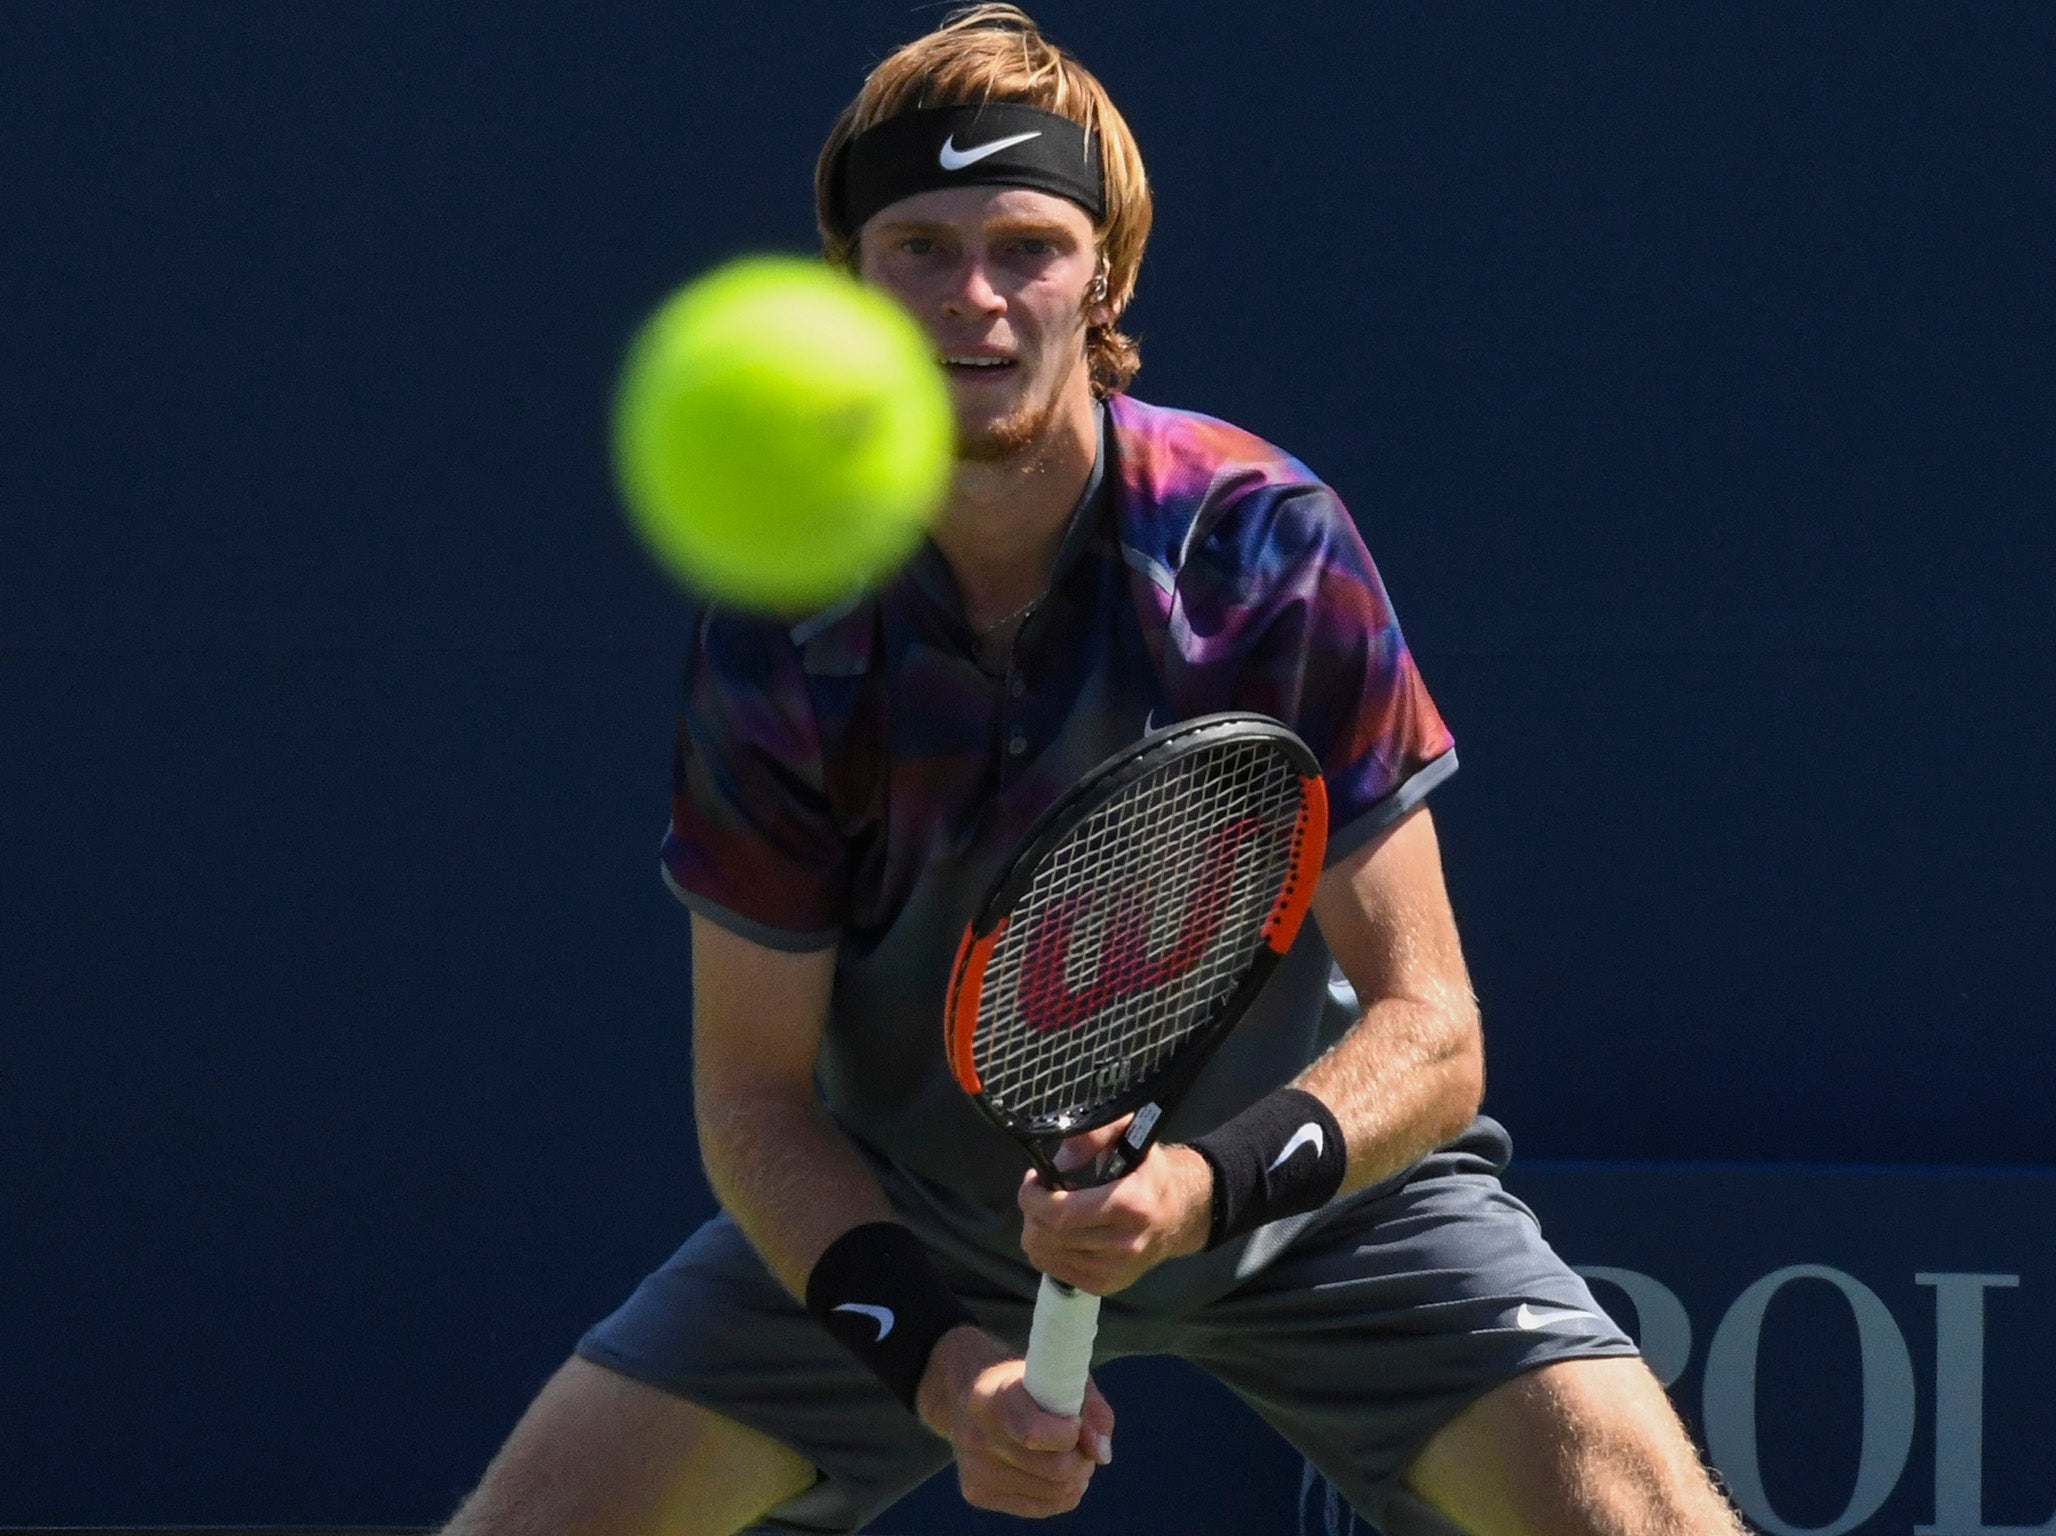 Rublev is next up for Nadal